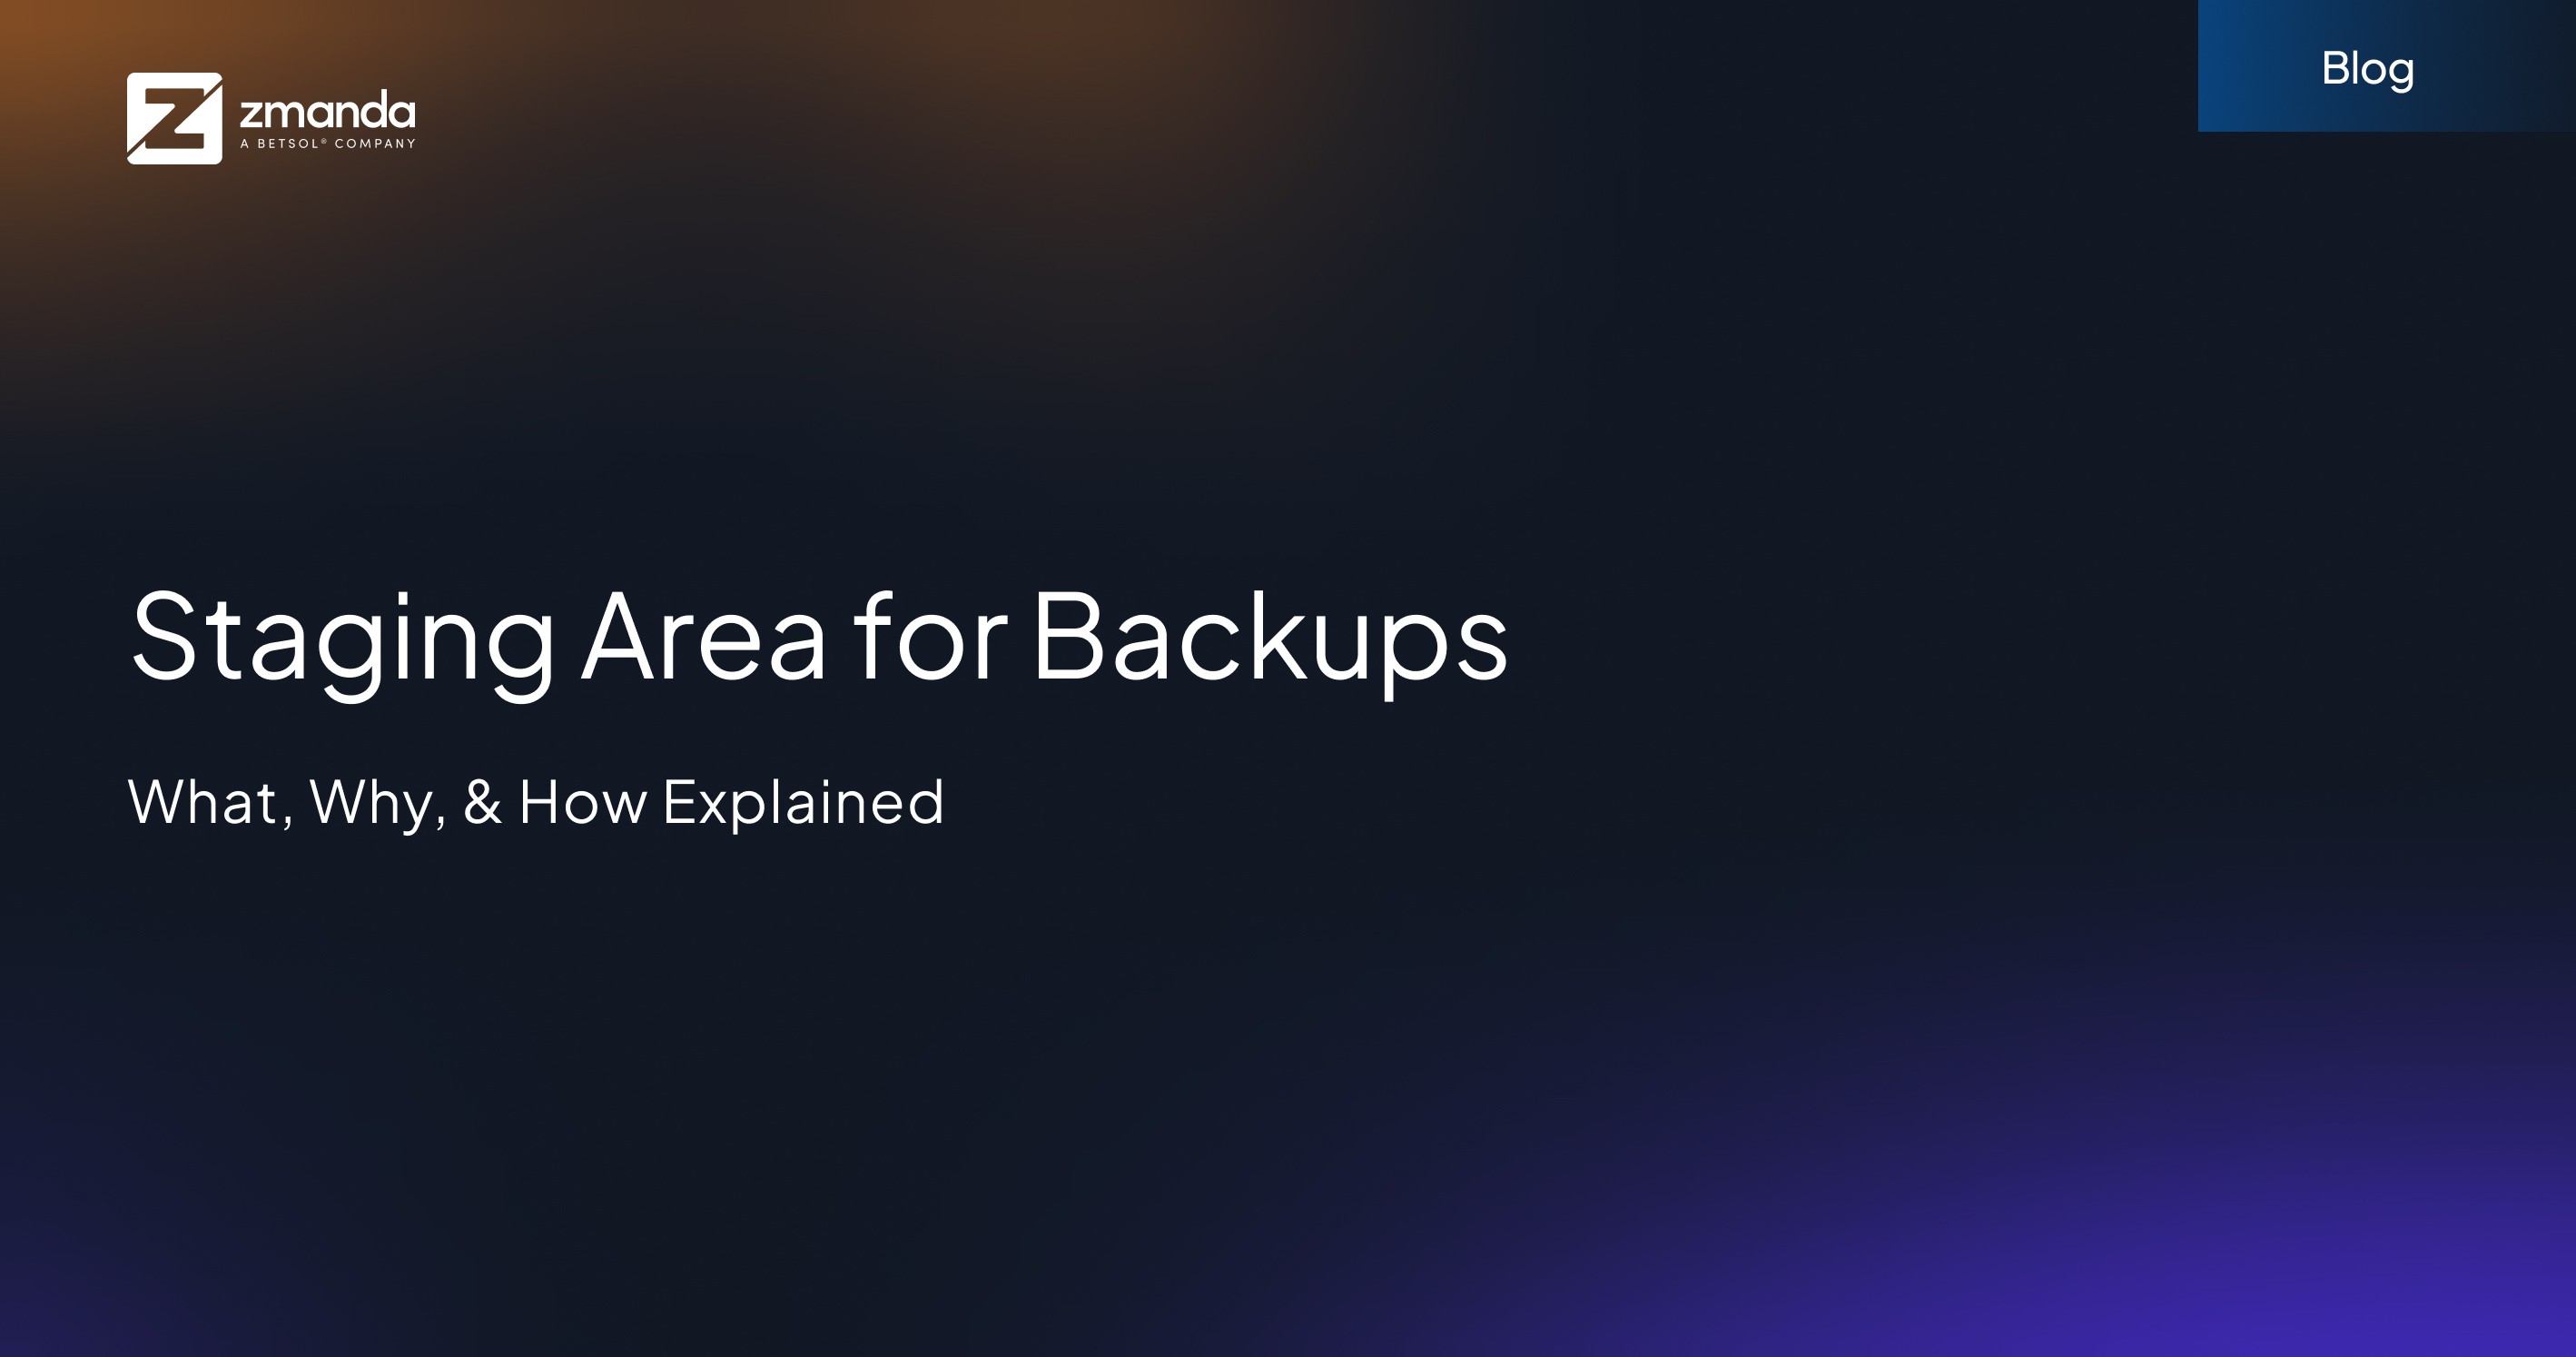 An image that has text Staging Area for backups explained